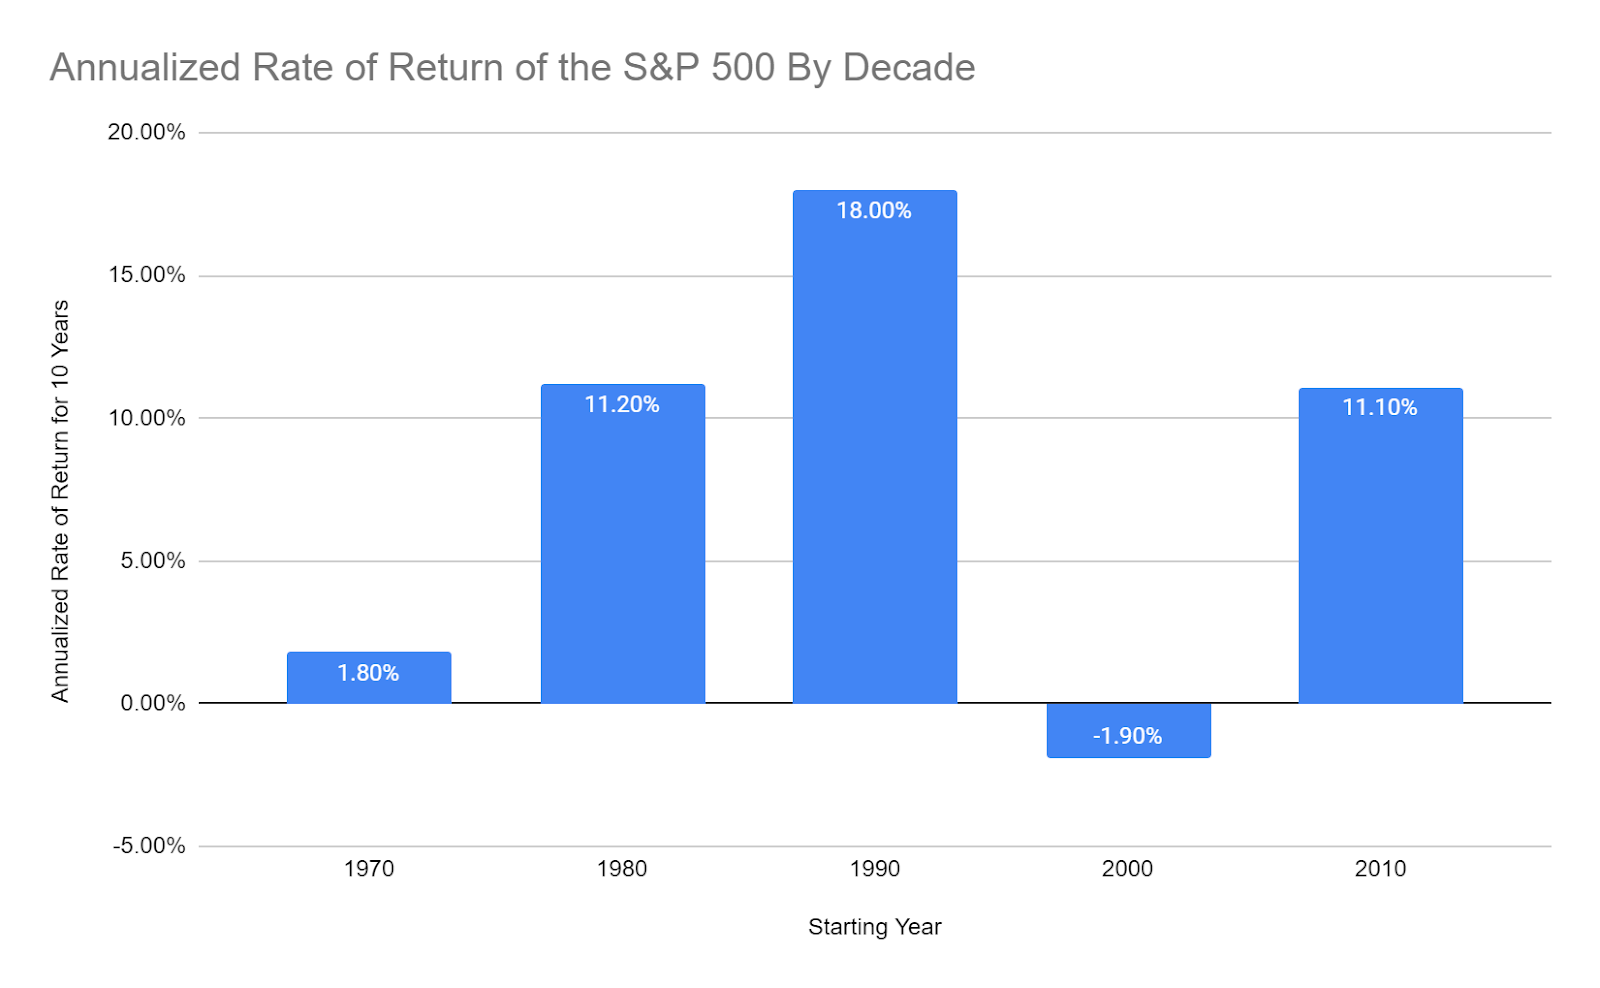 Annualized rate of return of the S&P 500 by decade